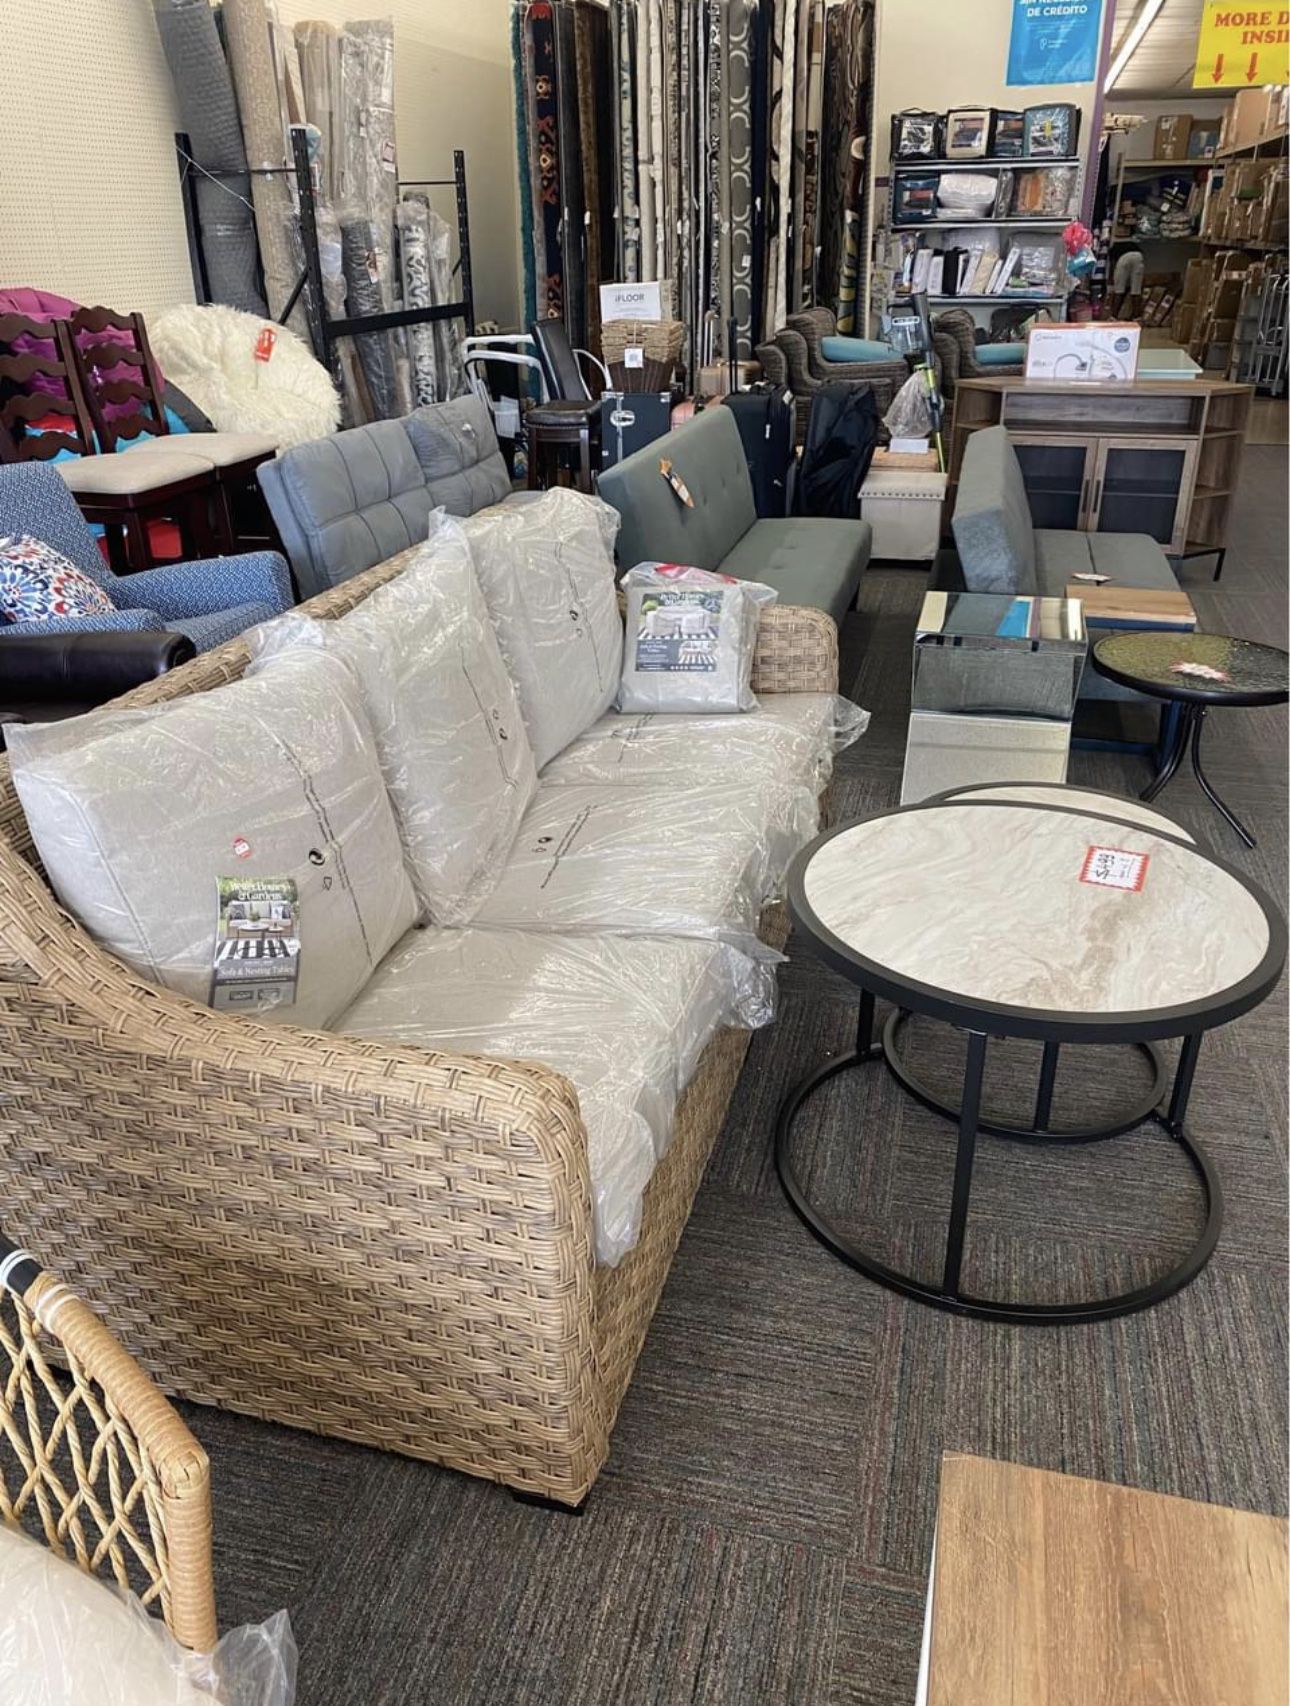 Better Homes & Gardens 3 Piece Sofa & Nesting Table Set With Patio Cover  For Sale In Norfolk, Va – Offerup Pertaining To 3 Piece Sofa & Nesting Table Set (View 9 of 15)